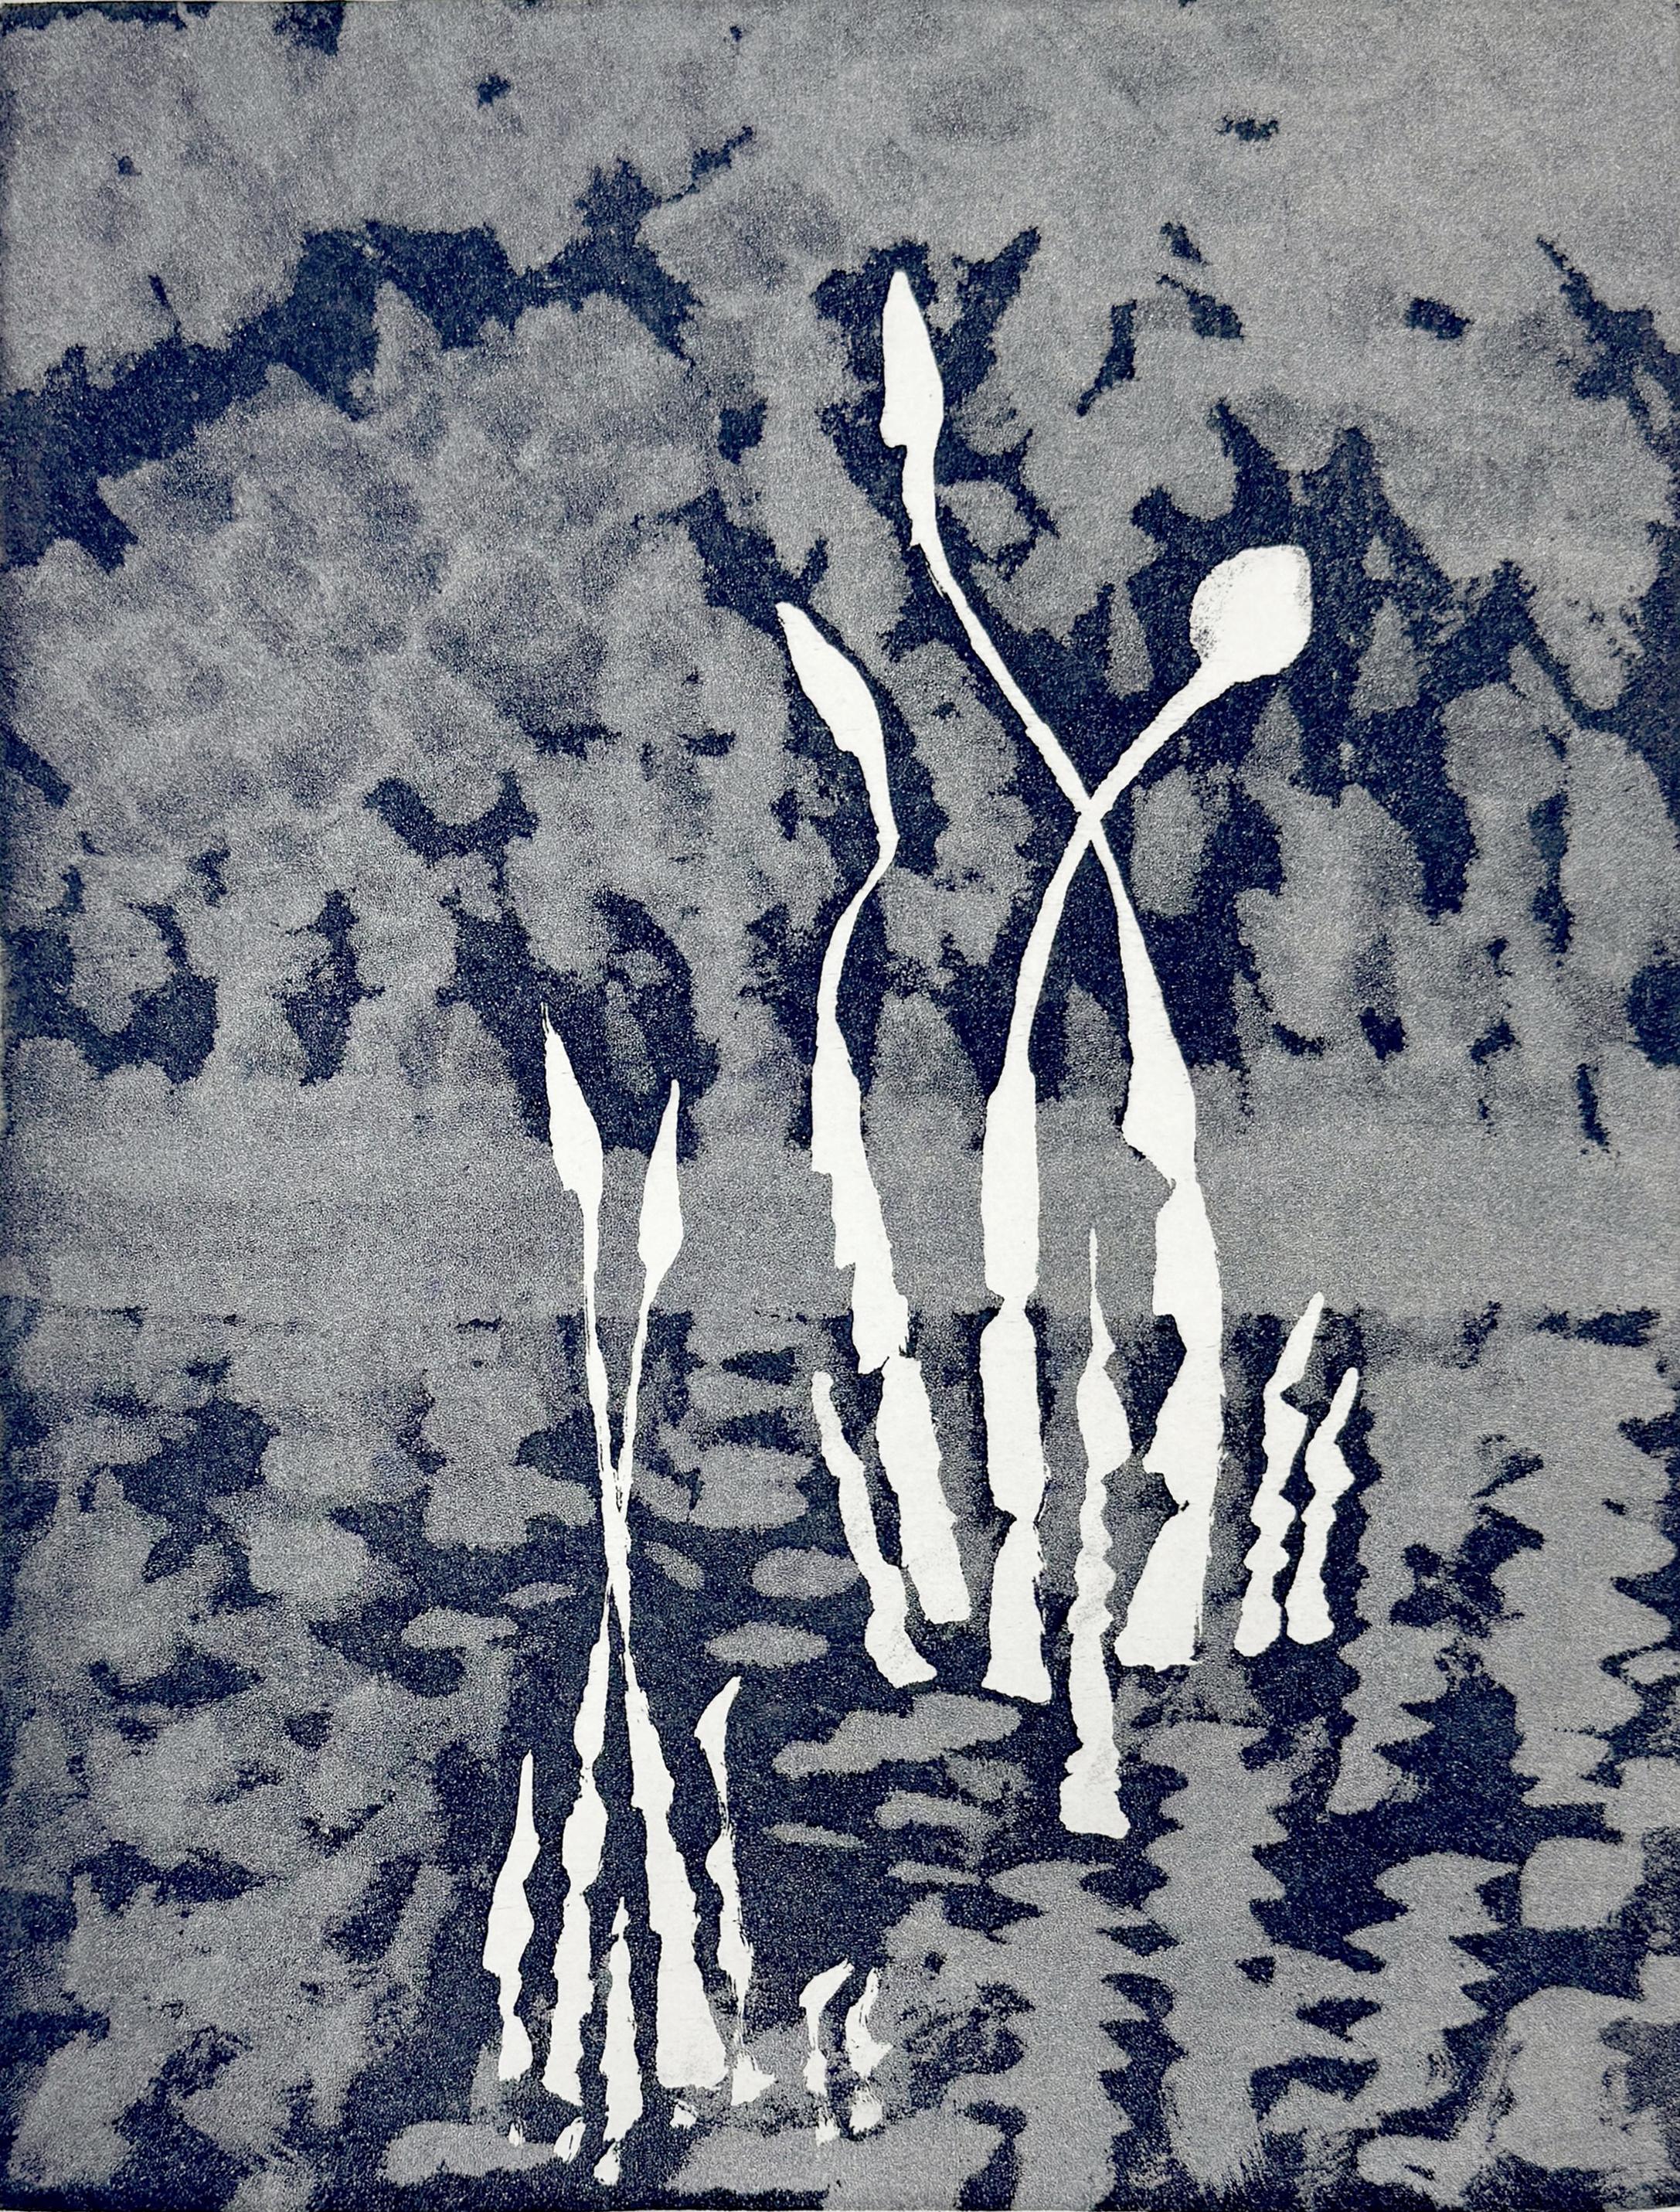 This moody composition depicts an abstracted waterscape—perhaps reeds waving gently, emerging from the water in which a cloudy sky is reflected. This etching is from Mark Tobey’s 1971 portfolio Transitions. Of his attempt to capture the transition